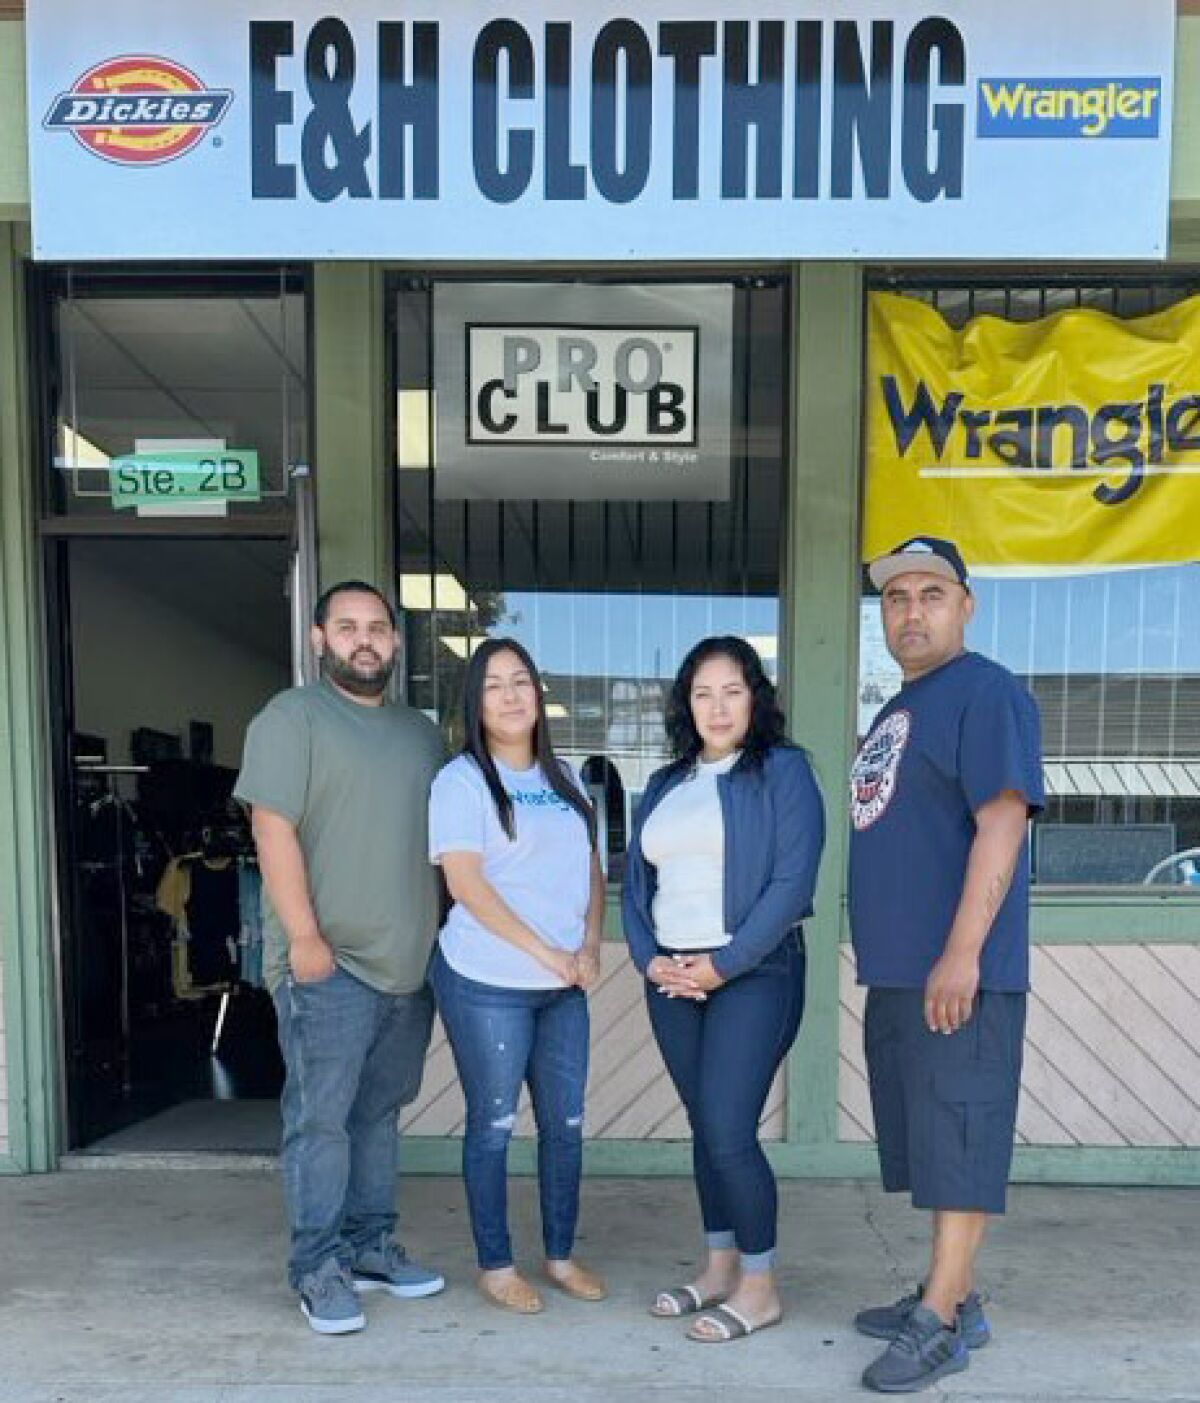 E & H Clothing owners are, from left, Hector Altamirano and Yuri Altamirano, and Guadalupe Hernandez and Eddie Hernandez.